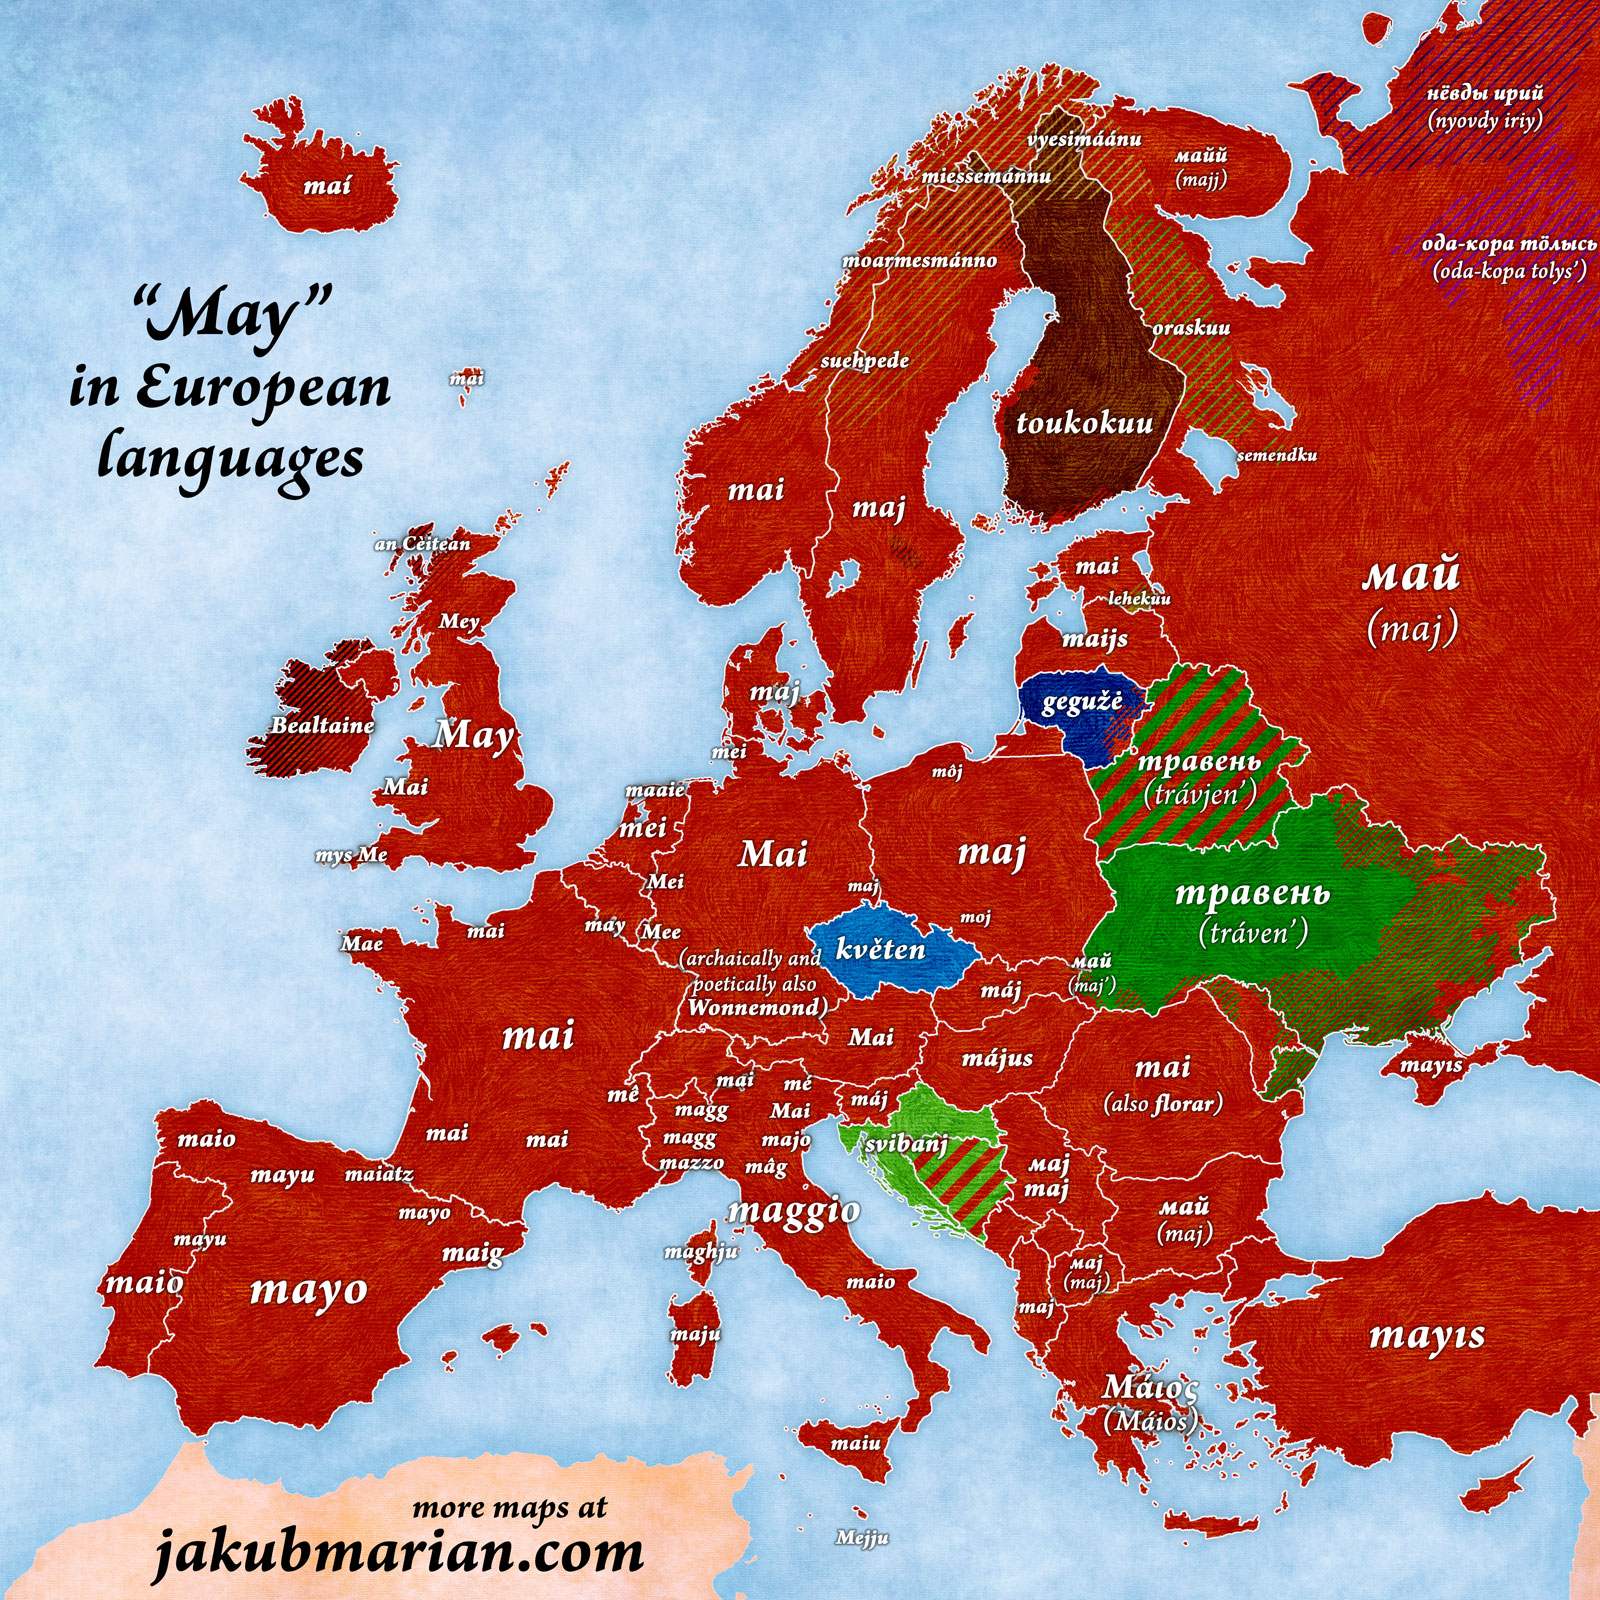 May in European languages